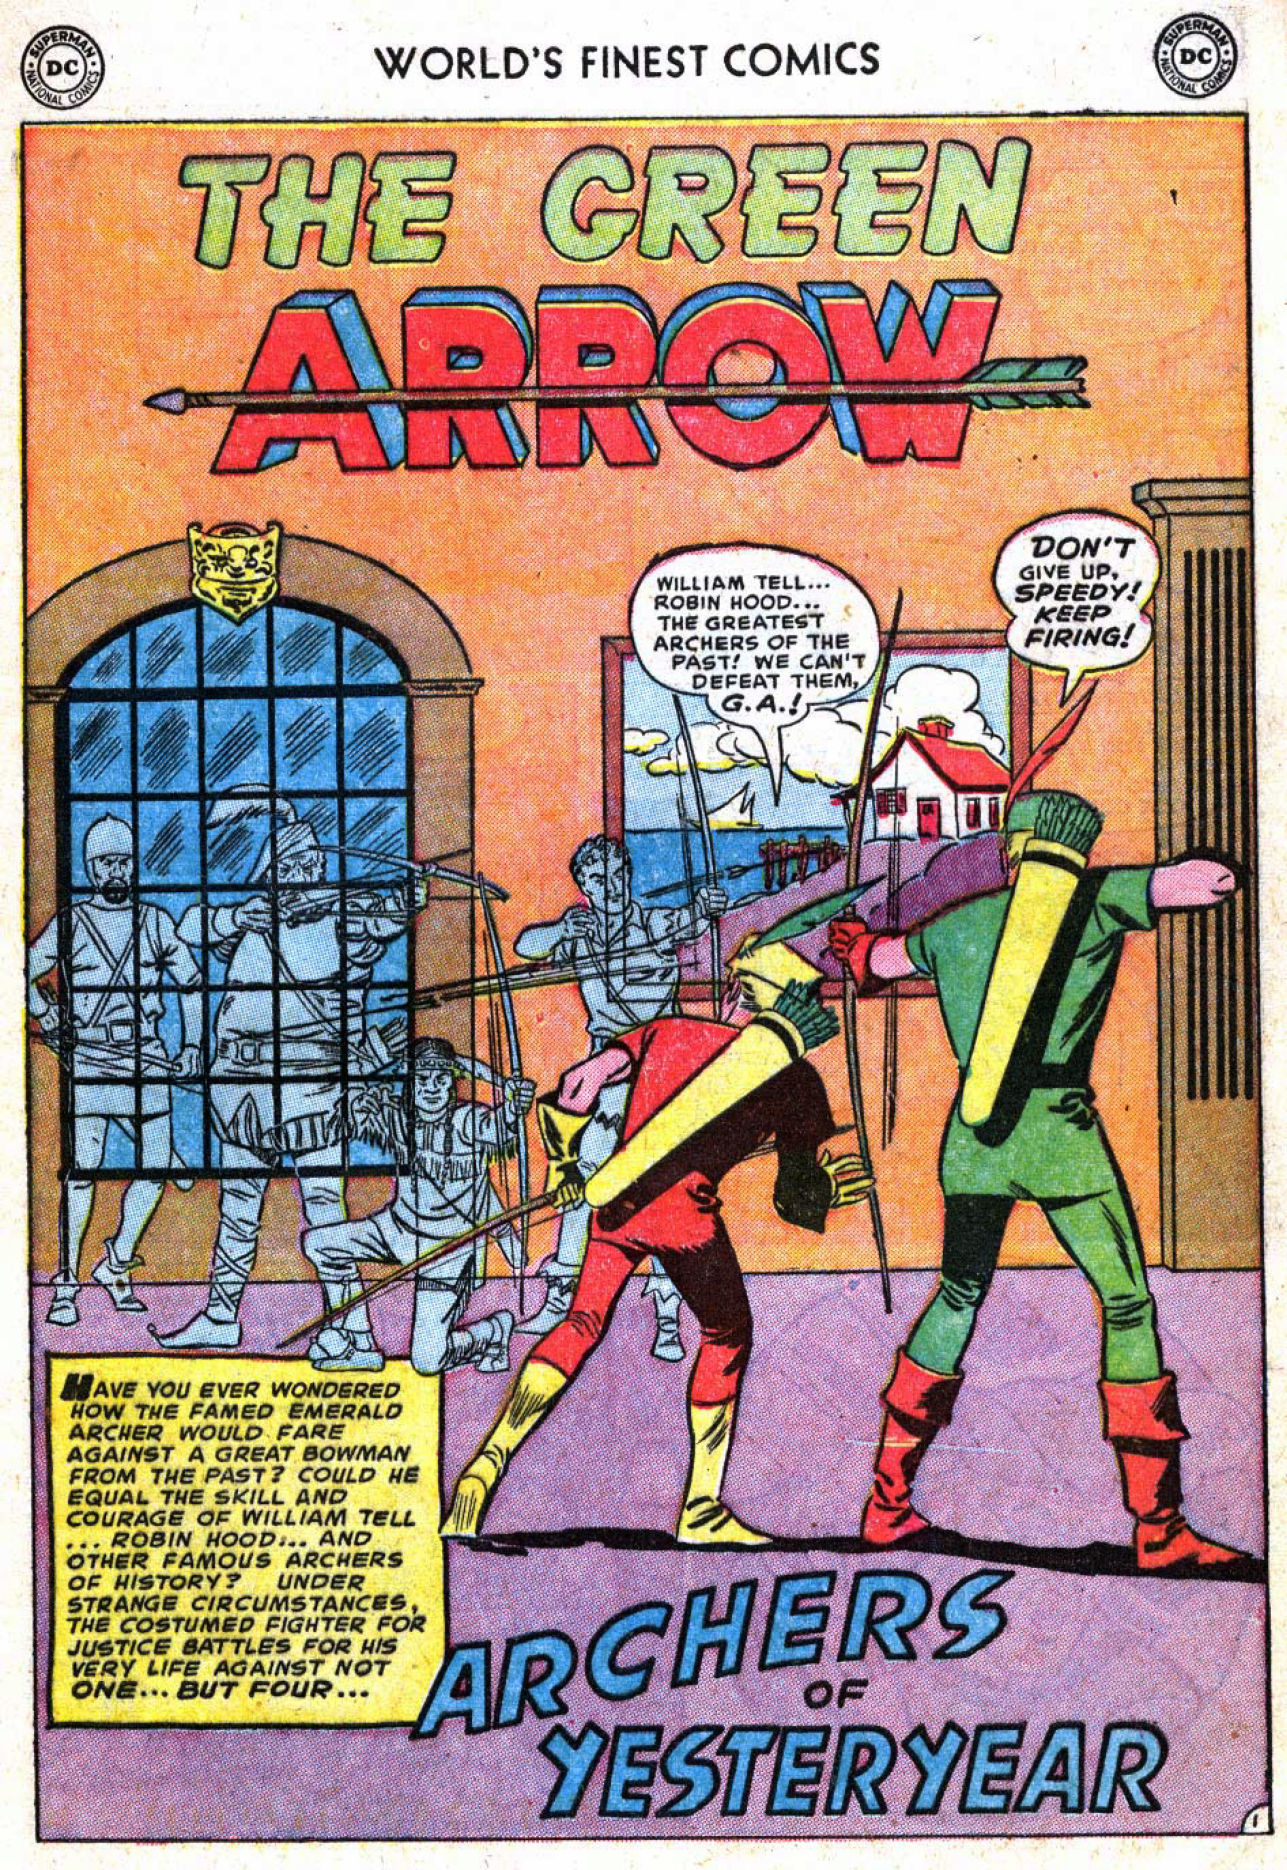 Splash page for Archers of Yesterday, Green Arrow story from World's Finest #63, art by George Papp